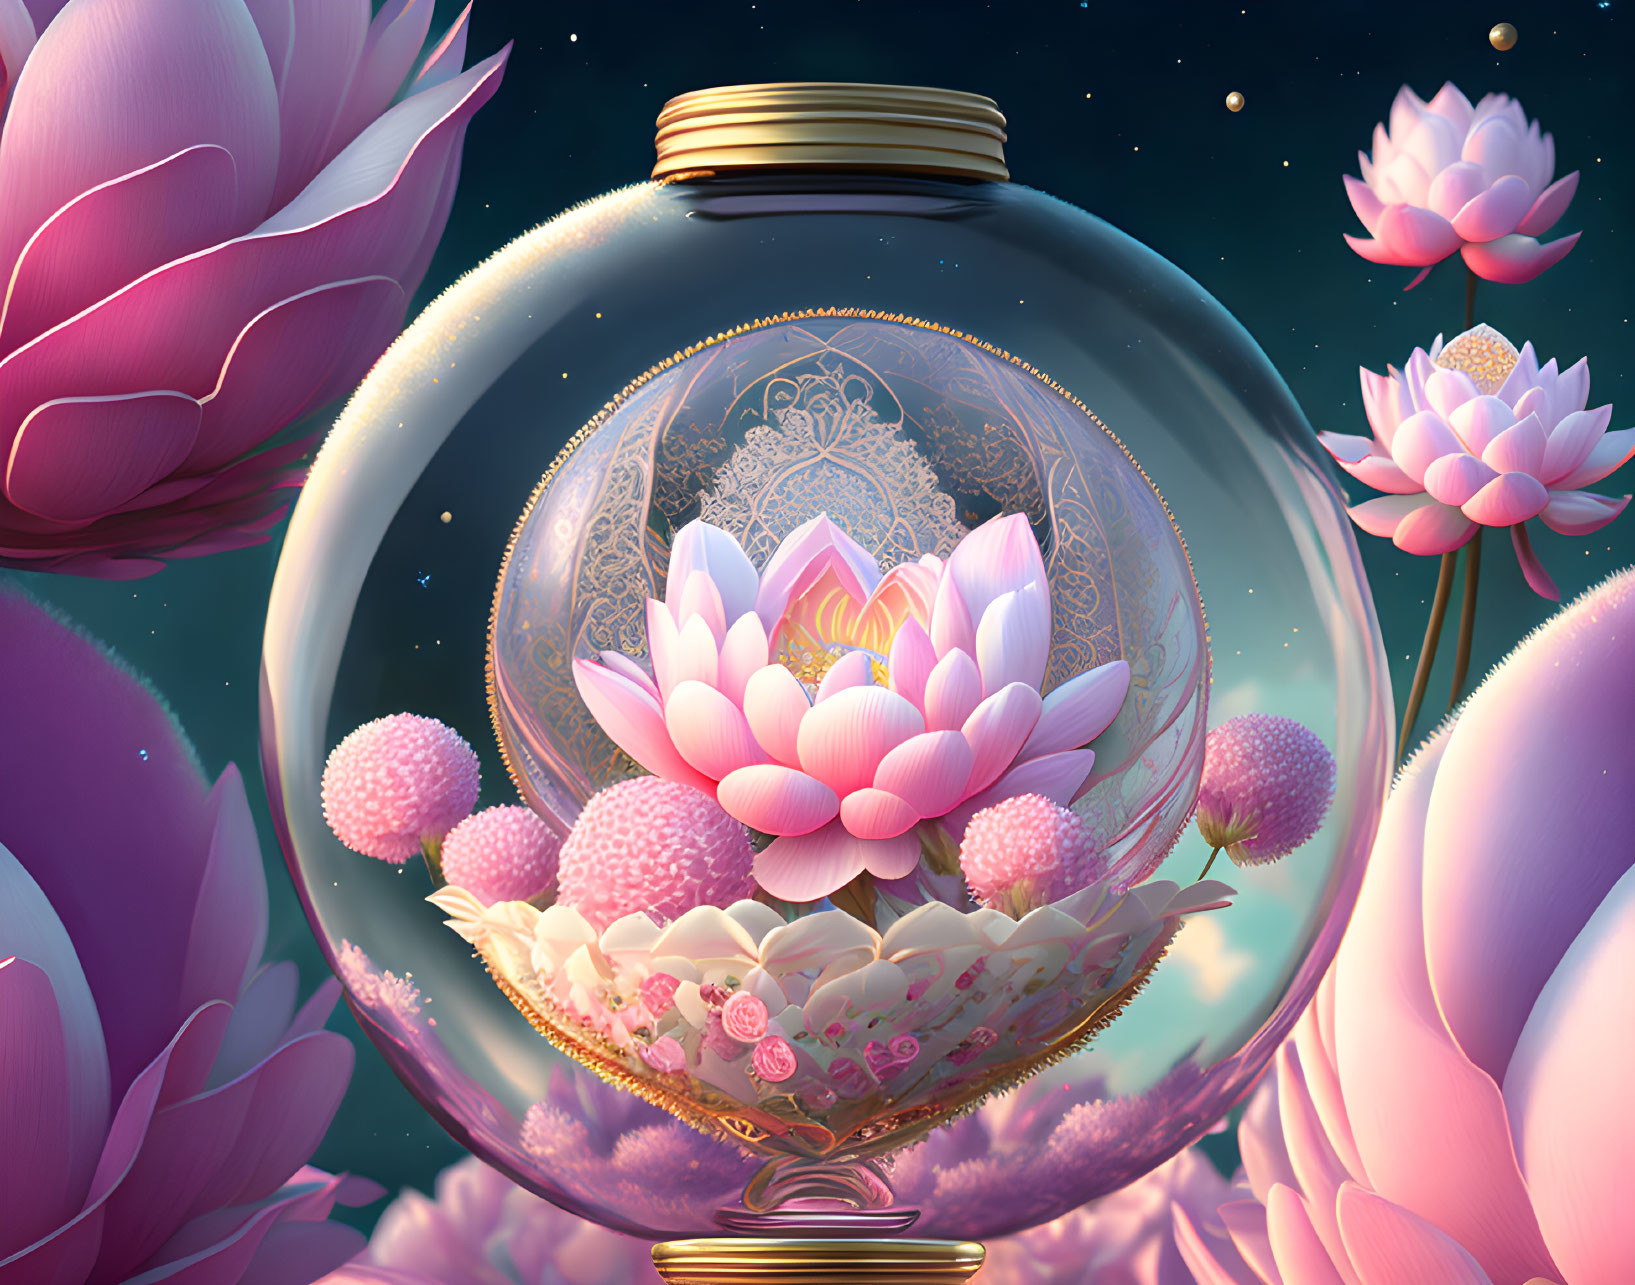 Glowing lotus in glass terrarium with pink blossoms under starry sky